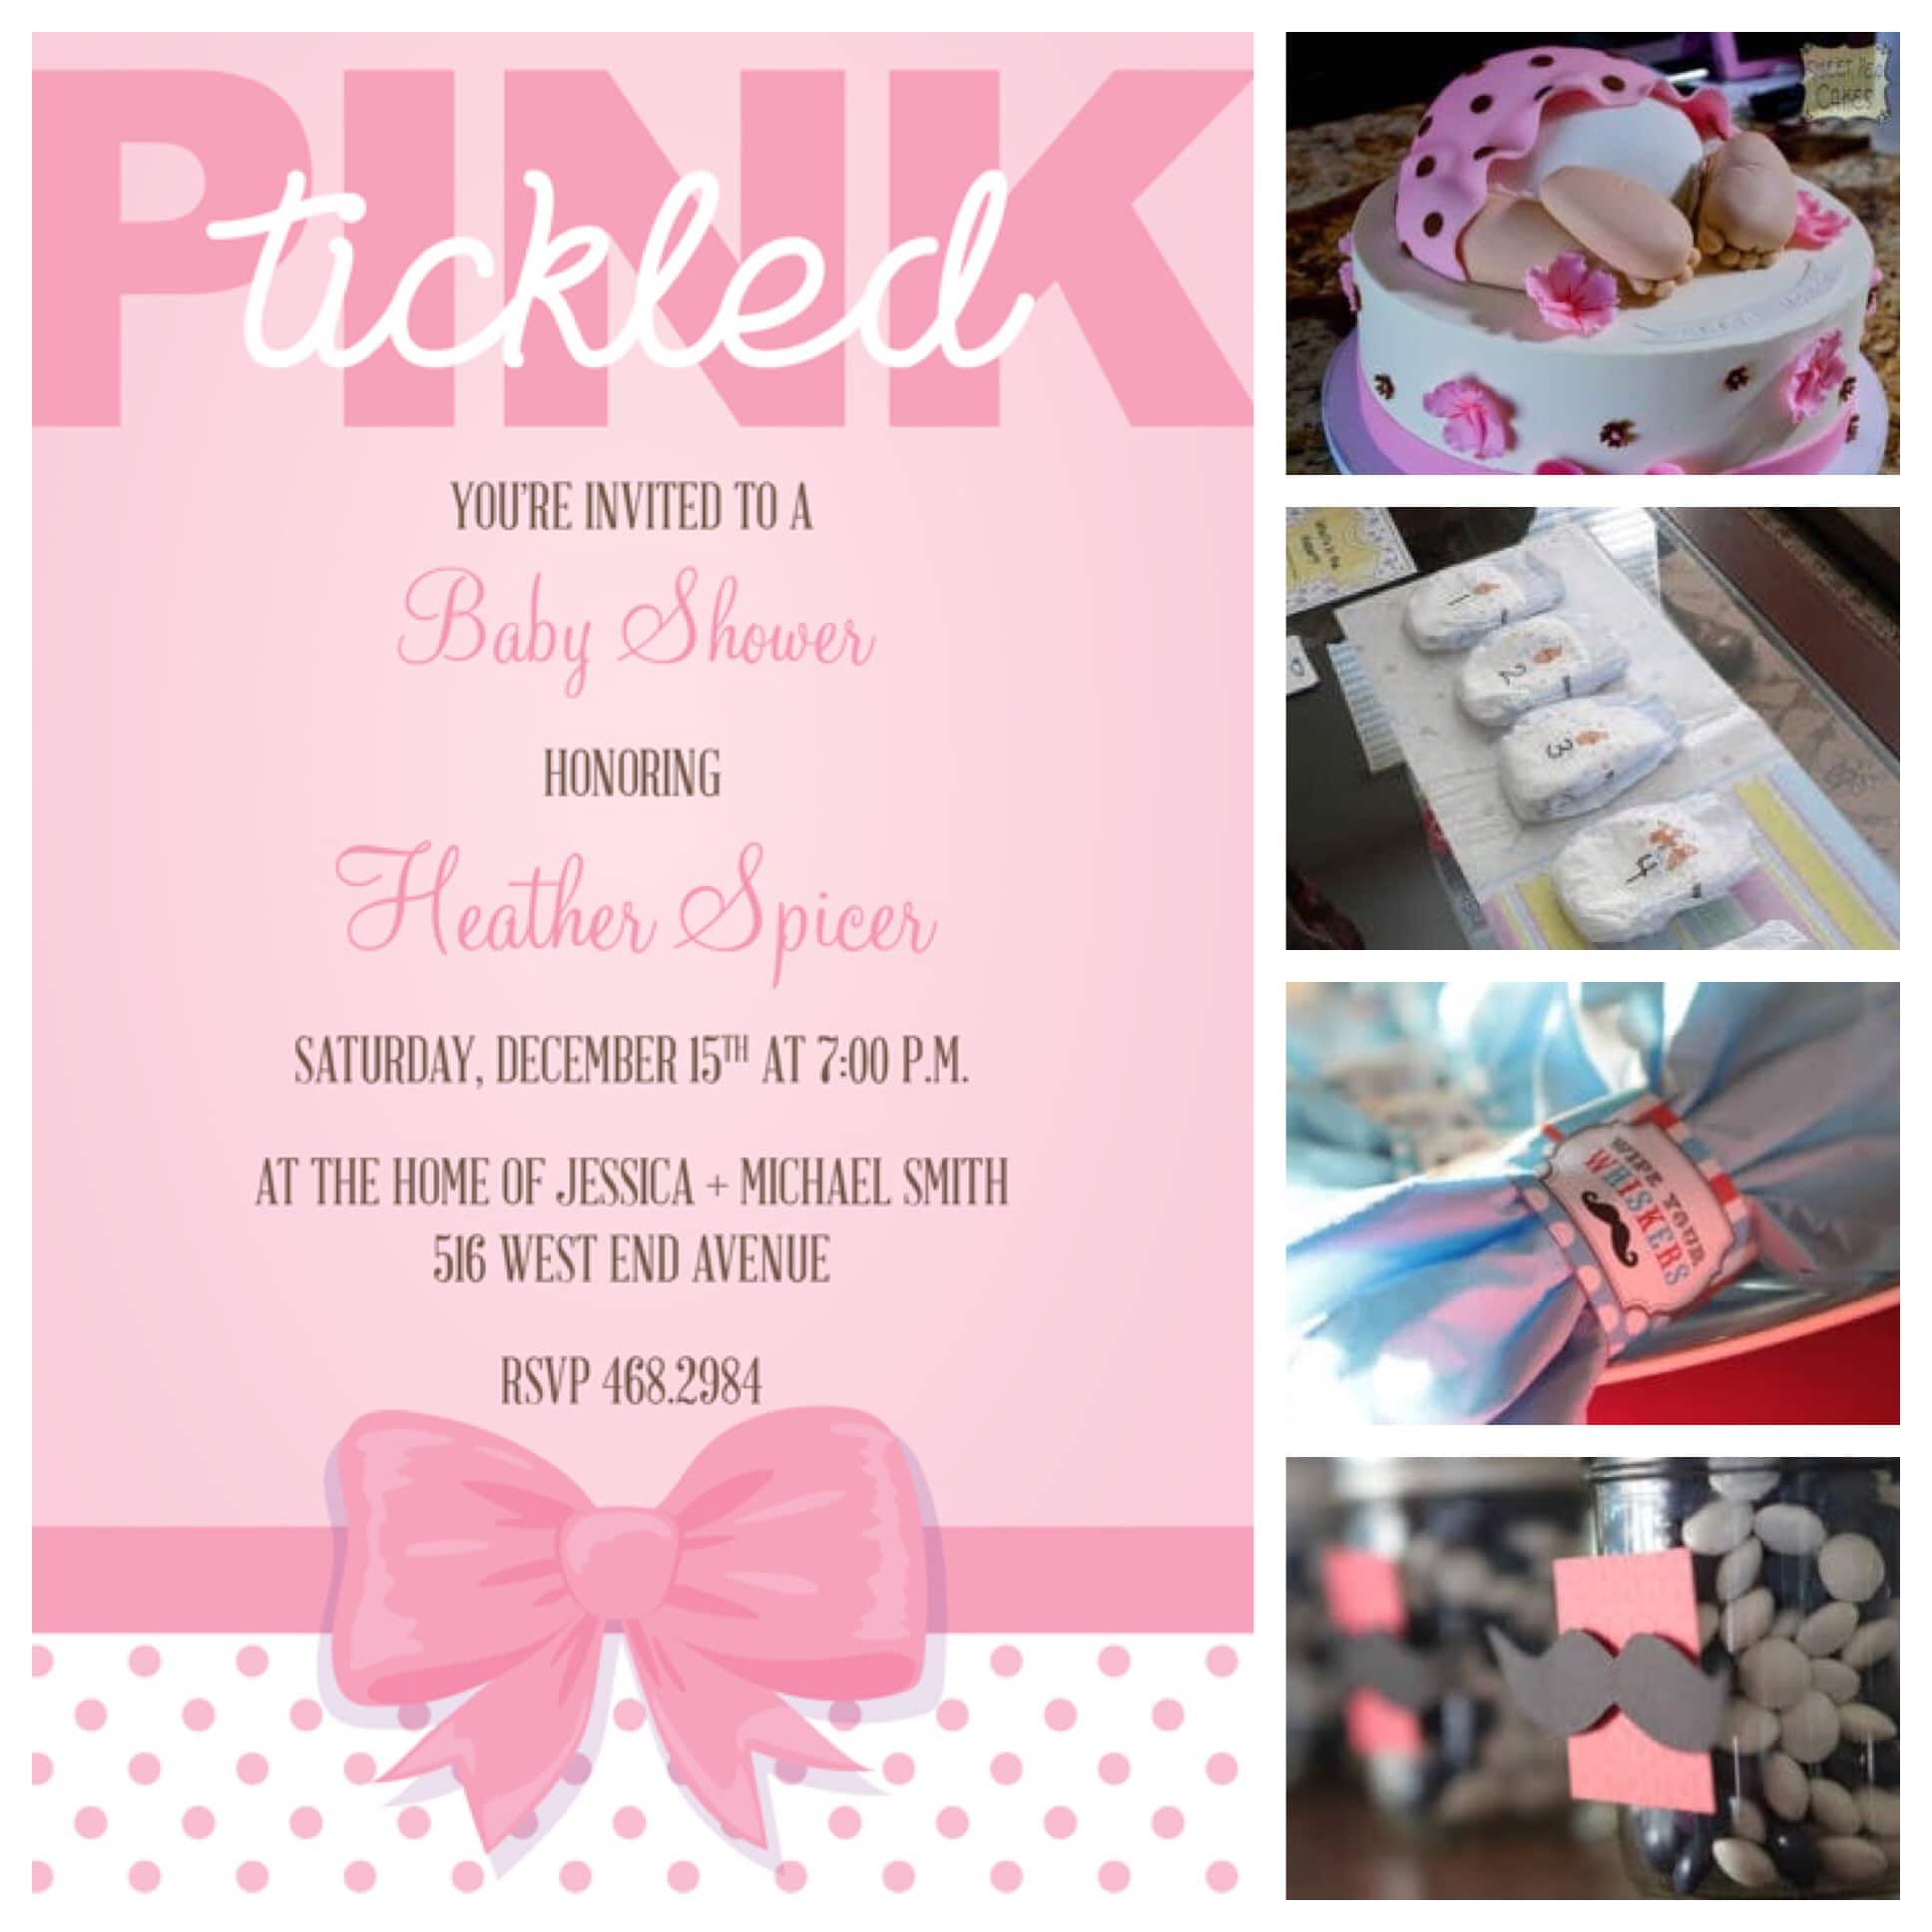 tickled pink invitations for a baby shower idea